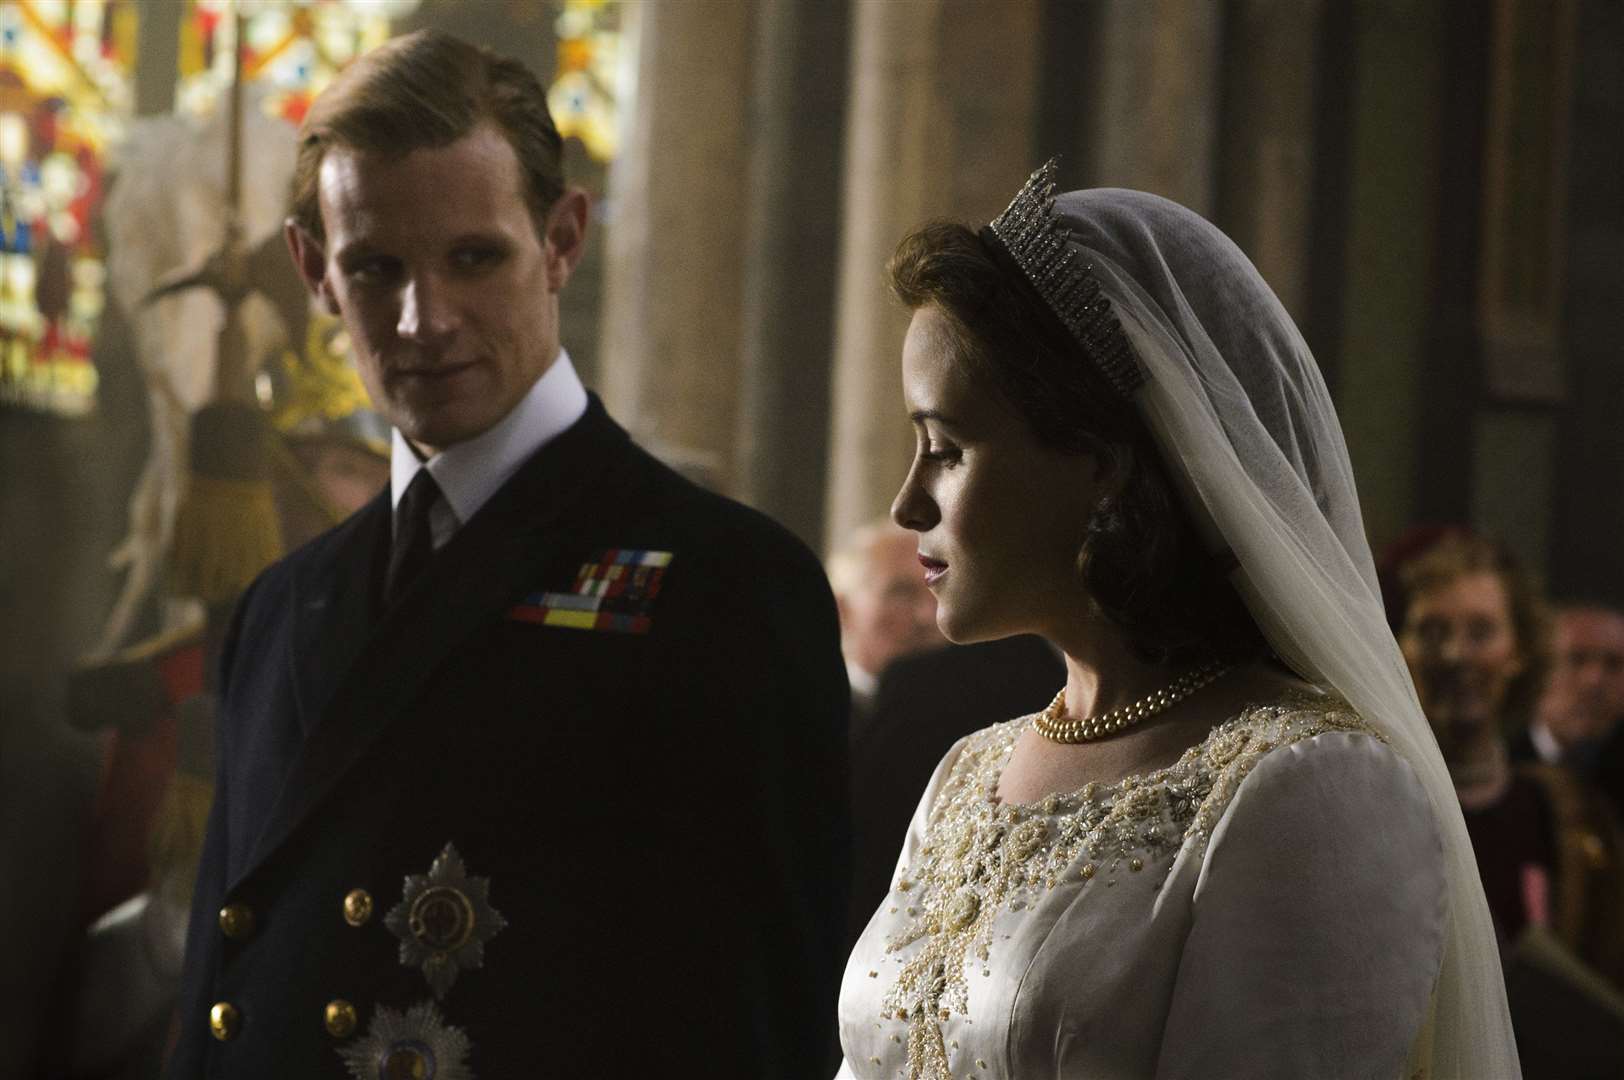 Netflix makes its own shows including The Crown